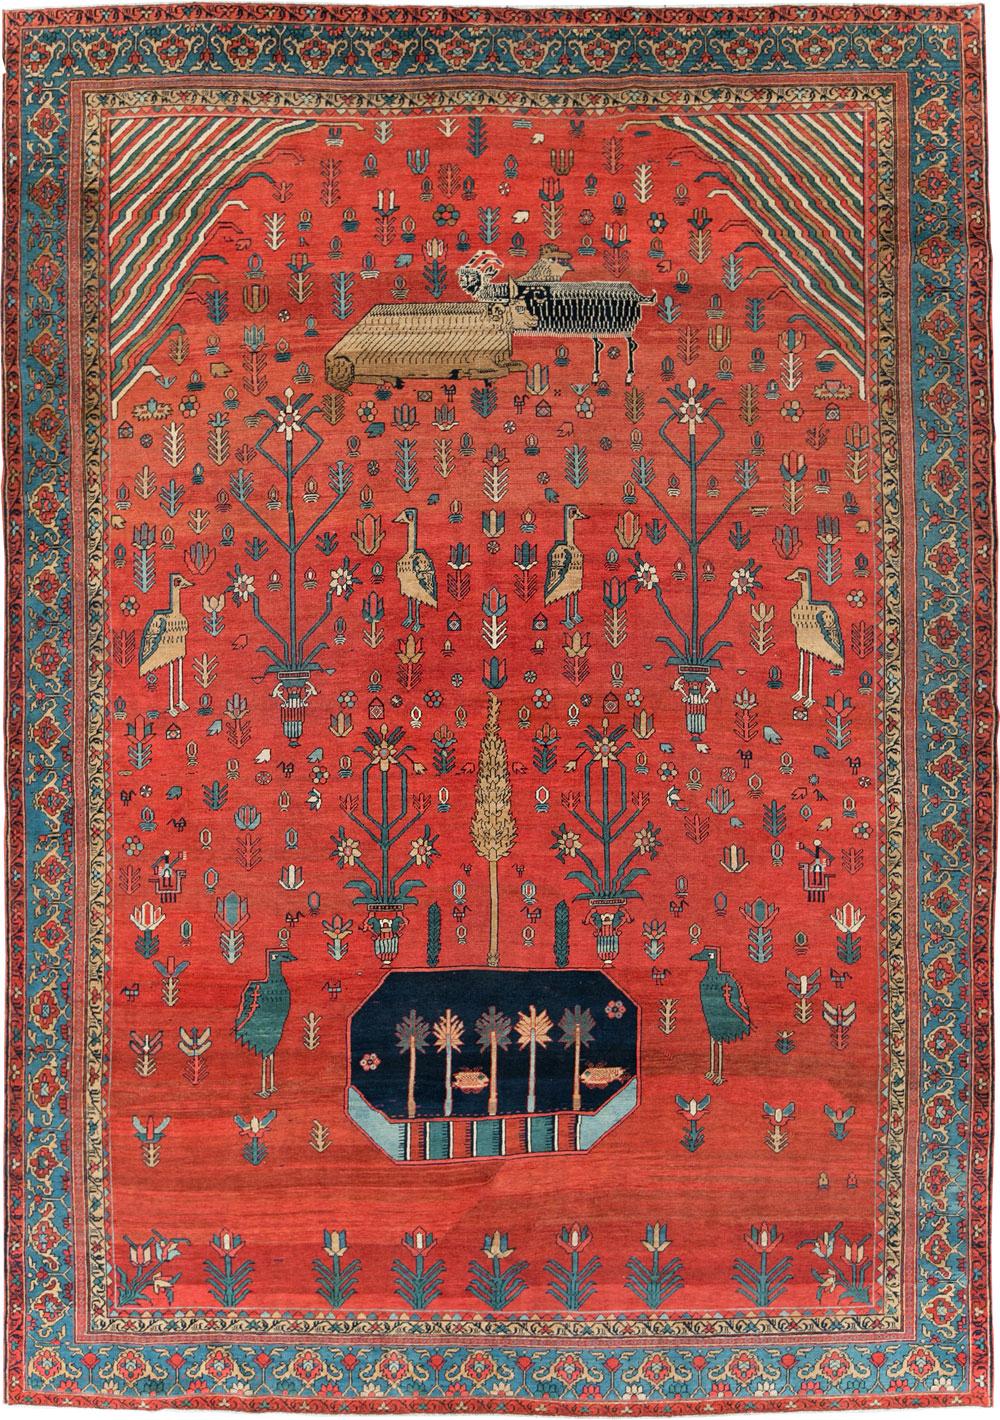 Rare early 20th-century pictorial animal Bakshaish rug with various sheep and pigeons floating around a red field

Measures: 9'9'' x 14'

The best Bakshaish carpets offer a unique combination of geometric all-over design formats with